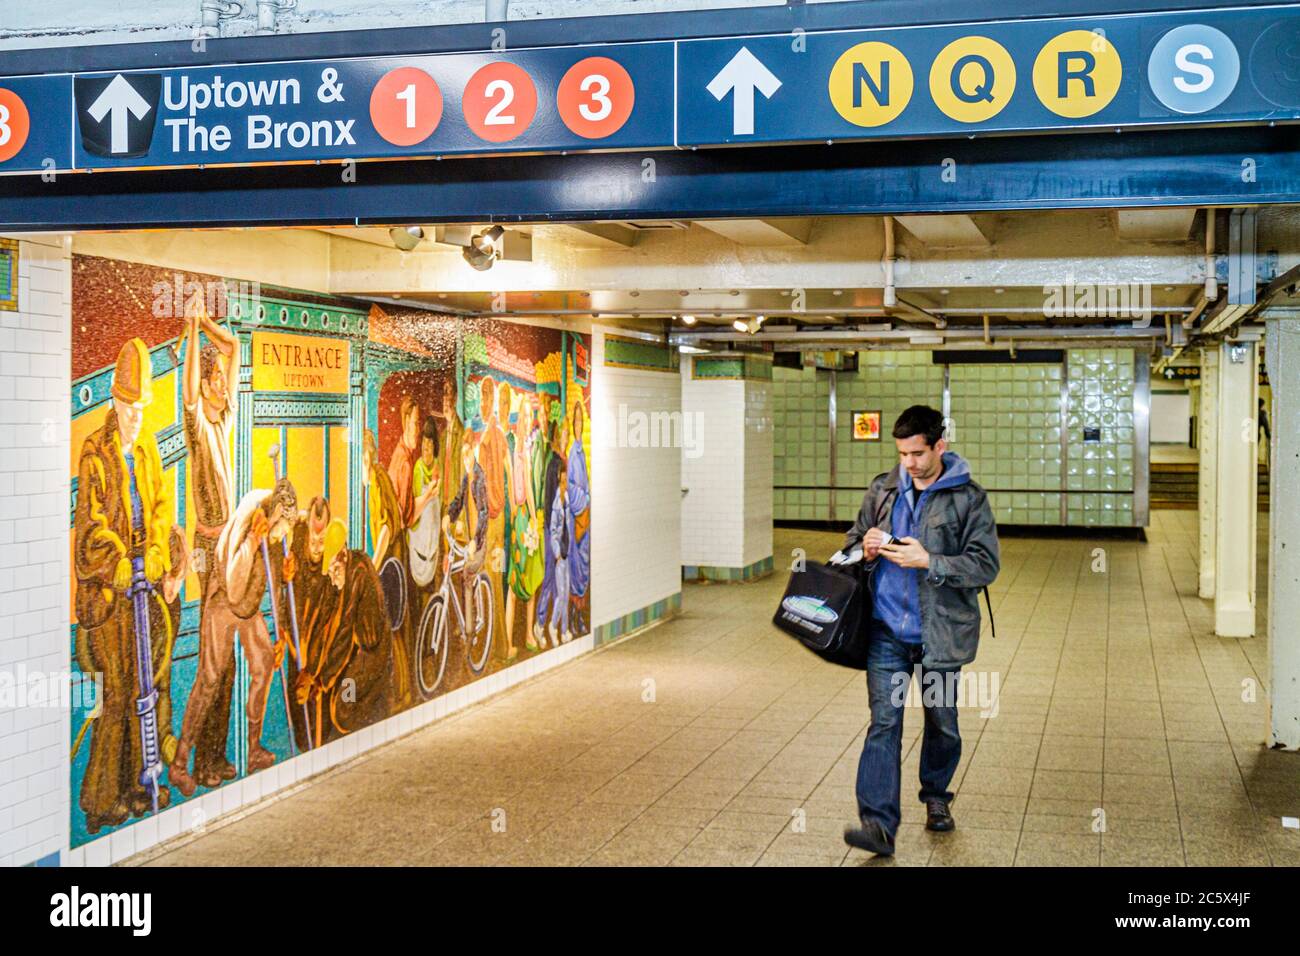 New York City,NYC NY Manhattan,Midtown,MTA,New York City,Subway system,Times Square Station,1 2 3 N Q R S highway Route,man men male adult adults,glas Stock Photo